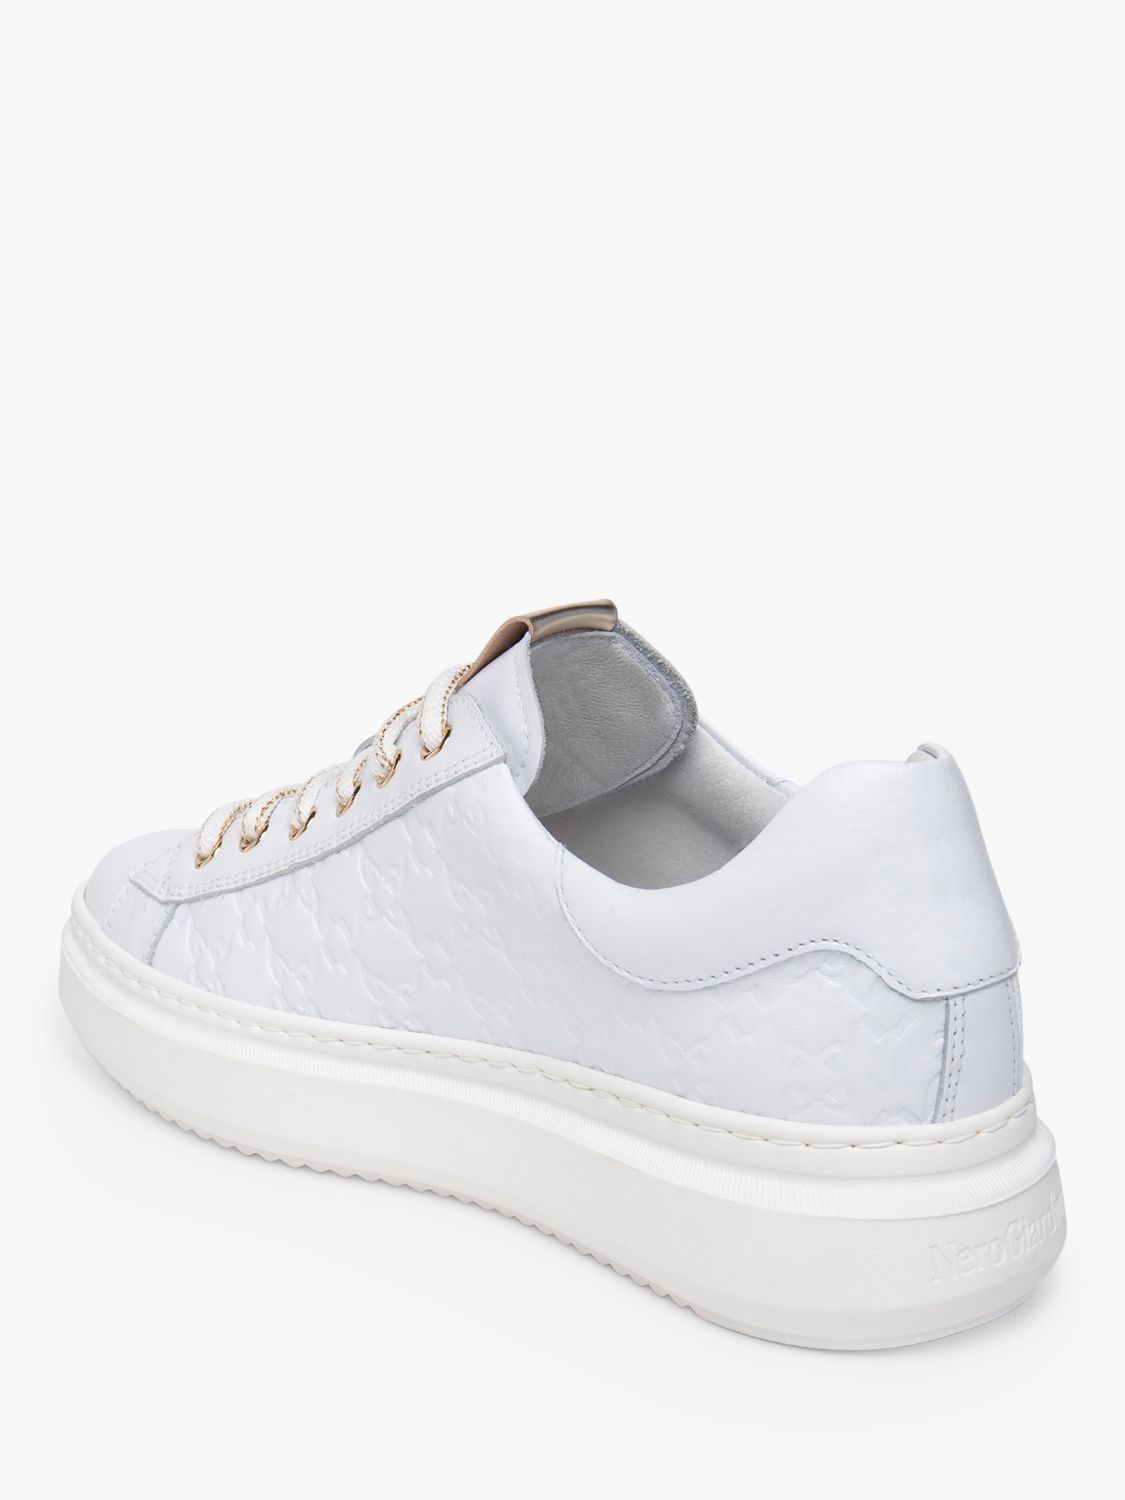 Buy NeroGiardini Leather Lace Up Trainers, White Online at johnlewis.com